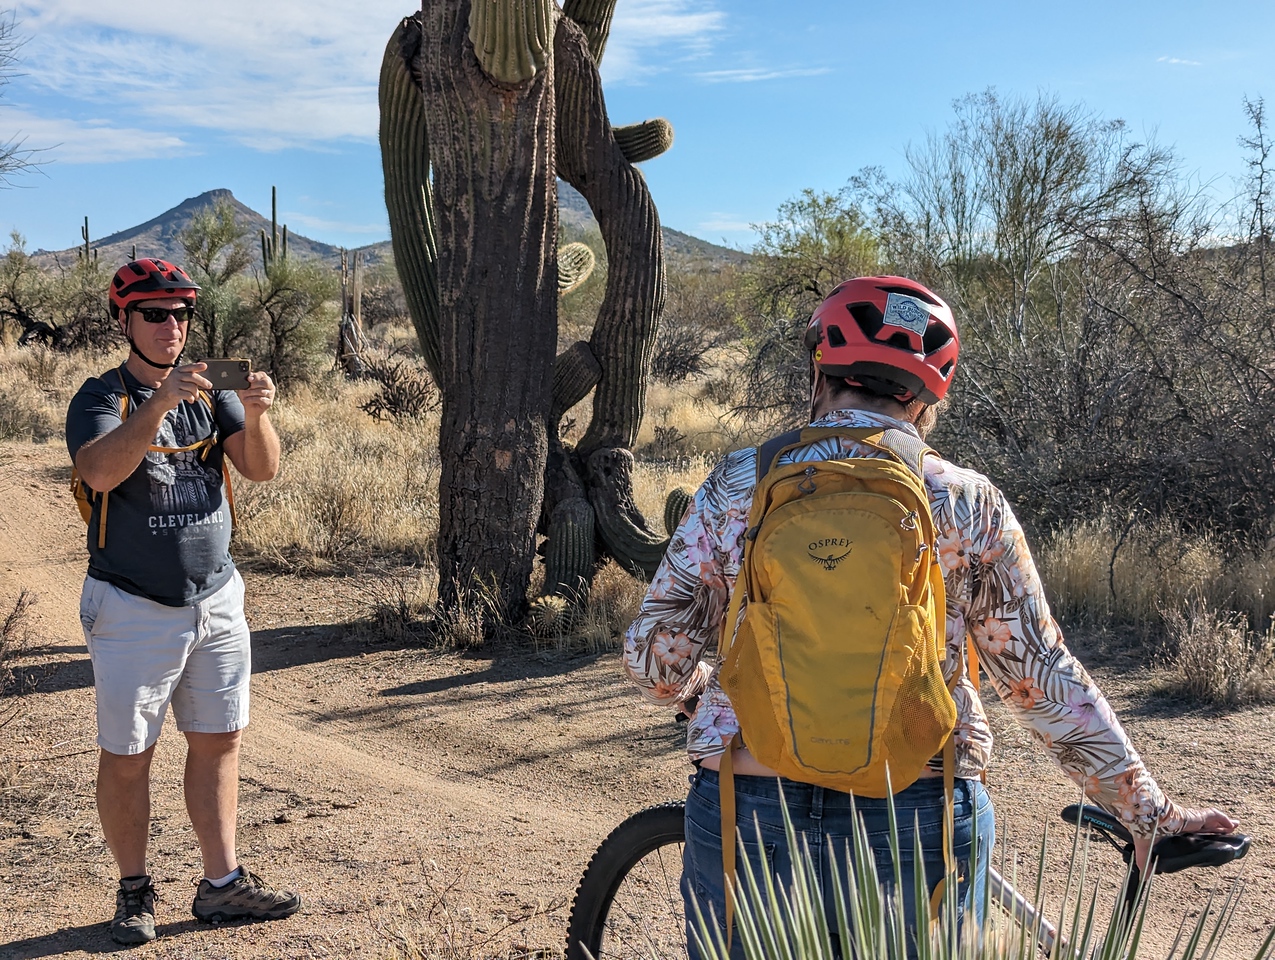 A husband pauses to take a picture of his wife posing in front of a picturesque backdrop on one of the Wild's Bunch's Phoenix mountain bike tours.